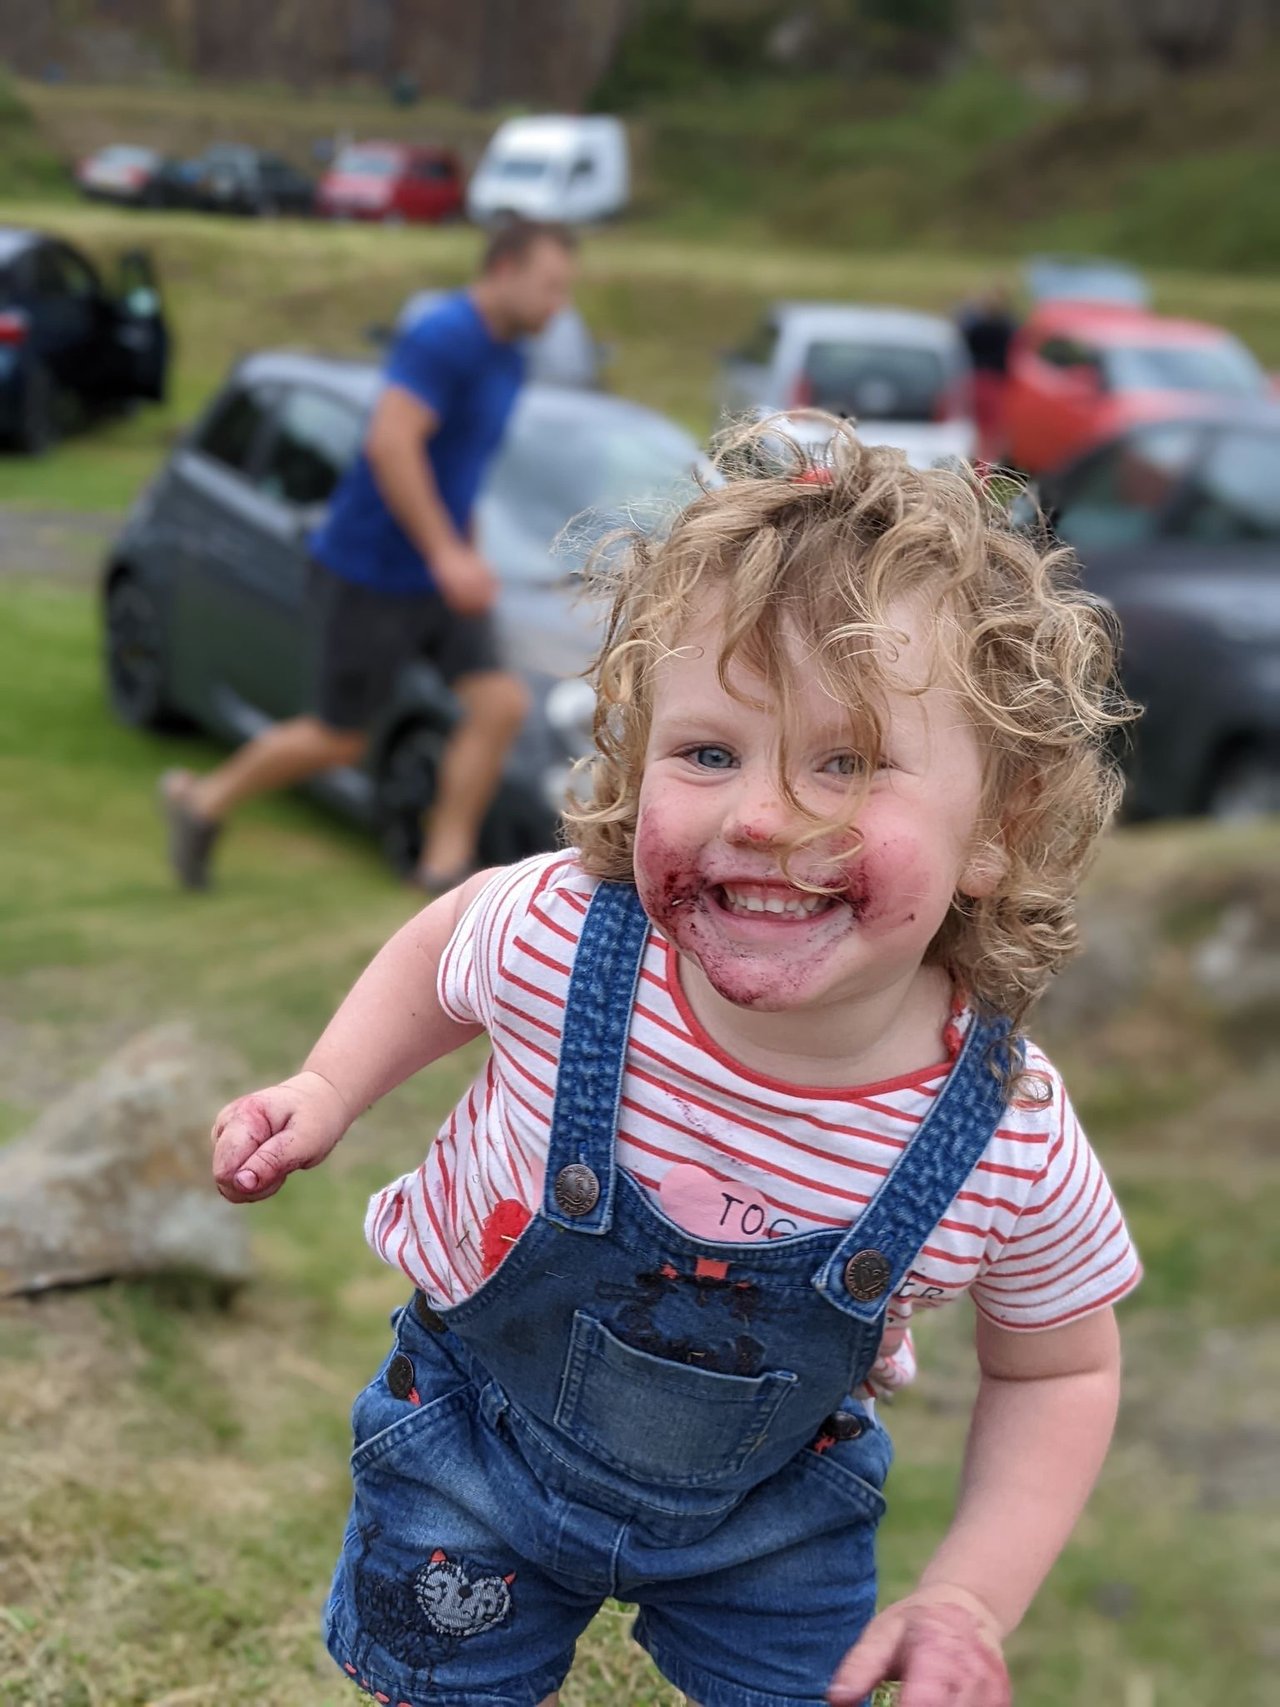 A beaming child with bilberries smeared across their face in Wilton 2 quarry